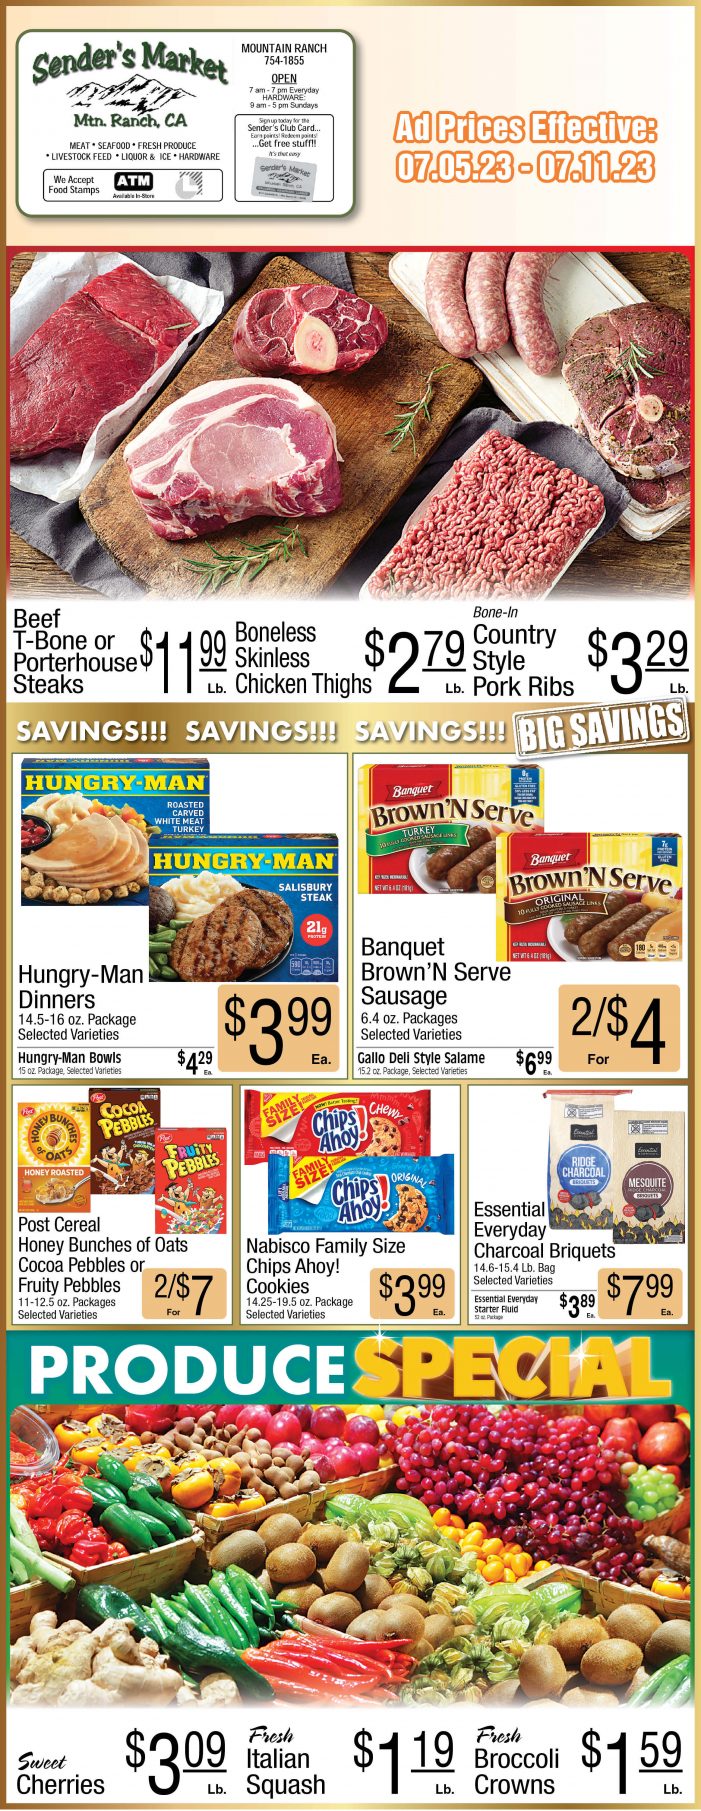 Sender’s Market Weekly Ad & Grocery Specials Through July 11th! Shop Local & Save!!